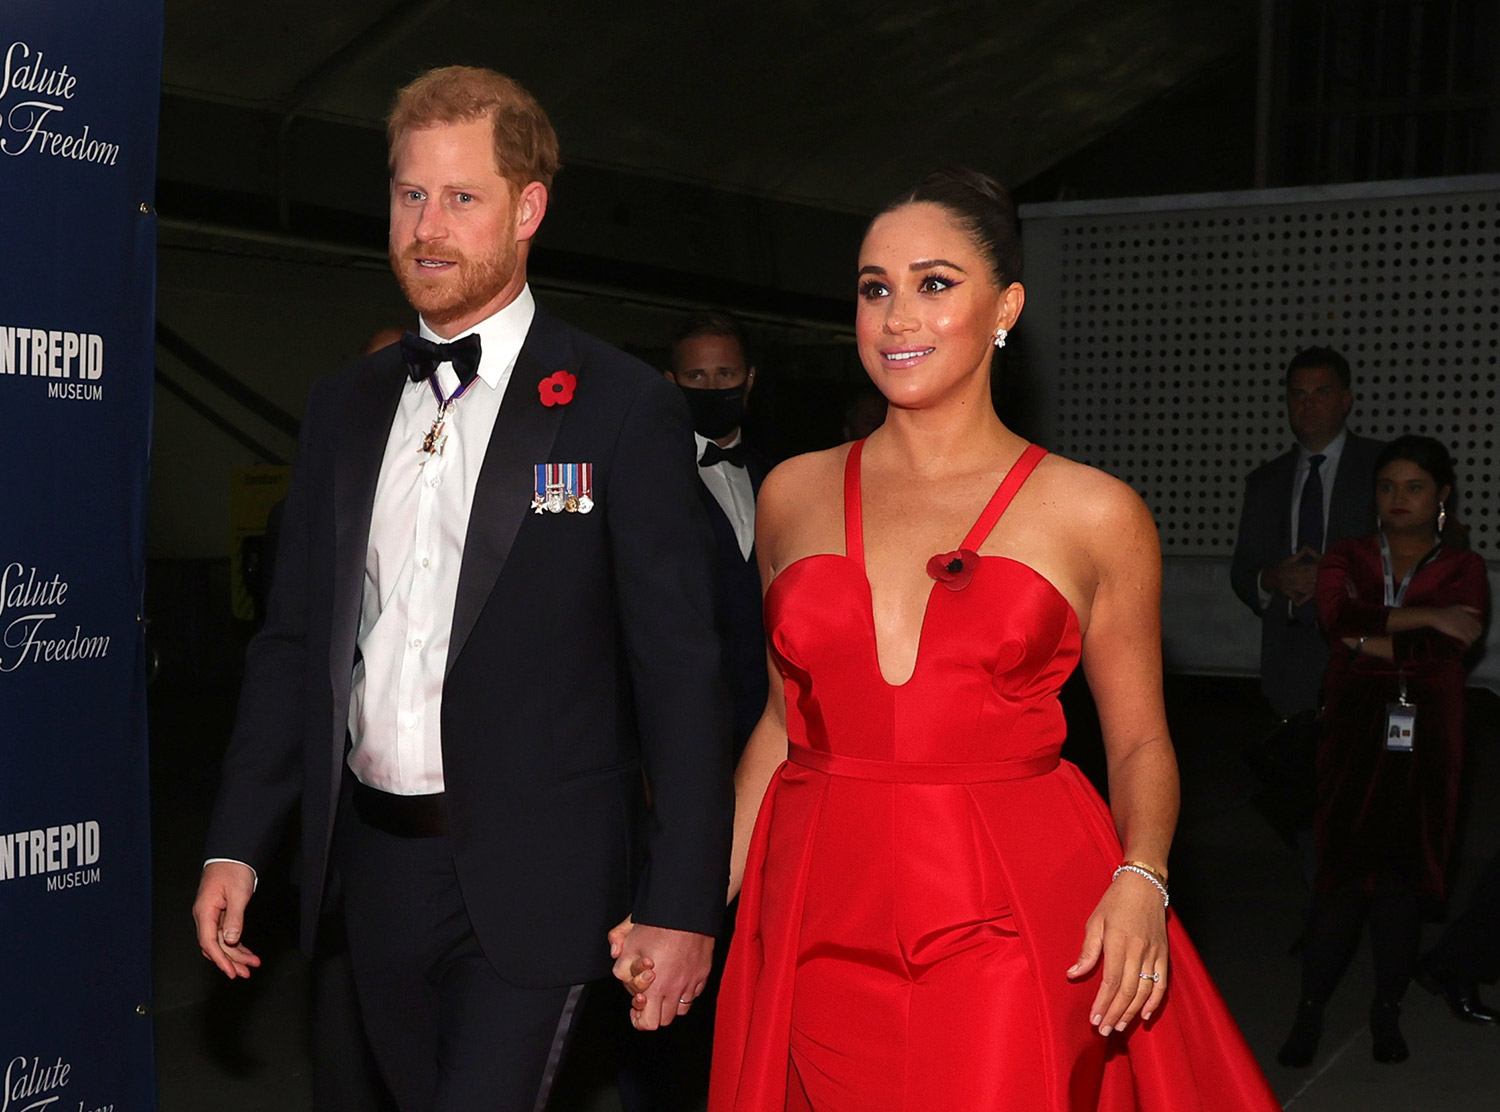 The Sussexes at the Salute To Freedom Gala 2021